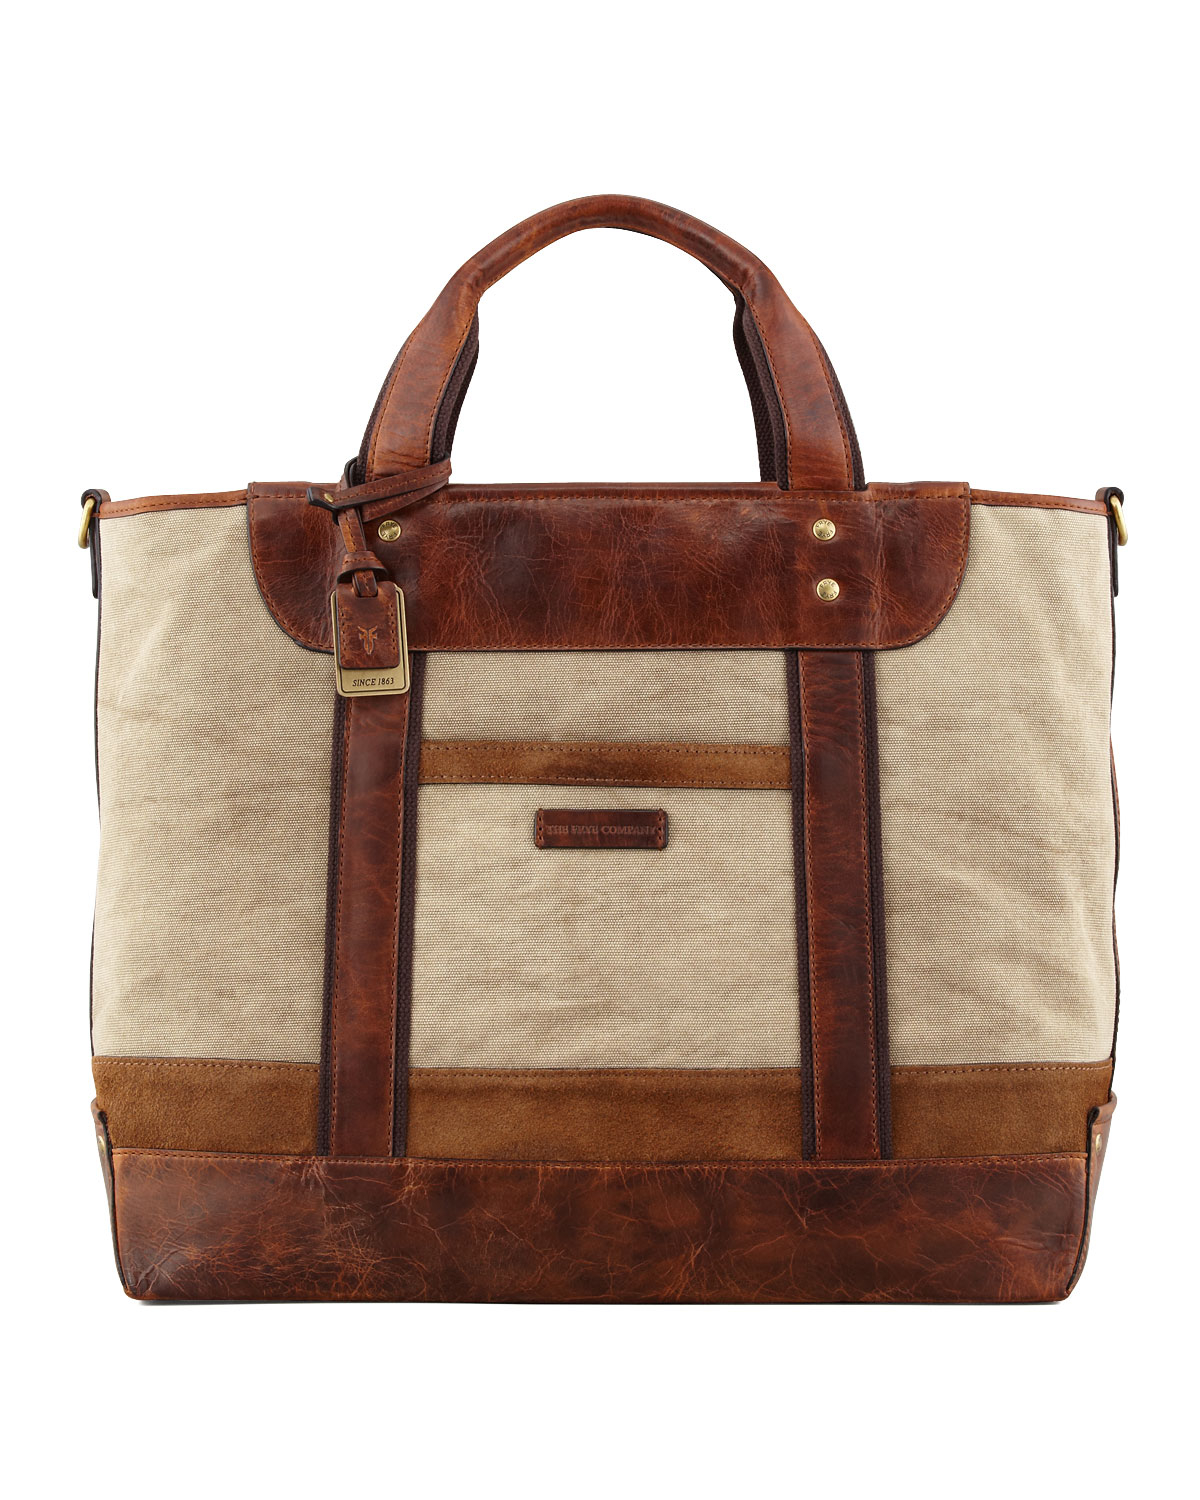 Lyst - Frye Harvey Canvas leather Tote Bag in Brown